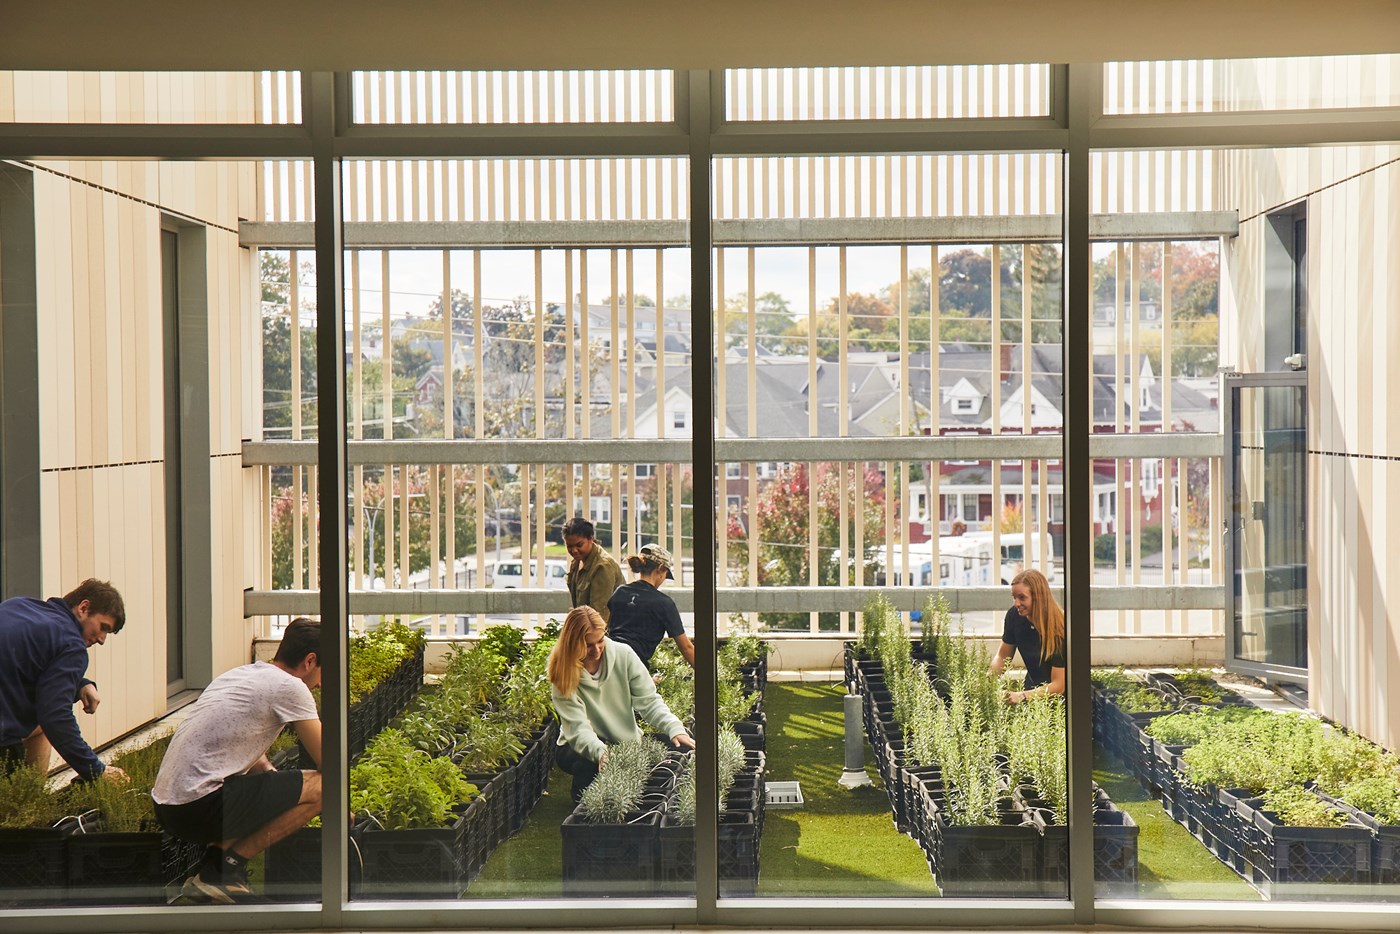 Image from outside the rooftop garden windows, showing students harvesting and maintaining the garden.